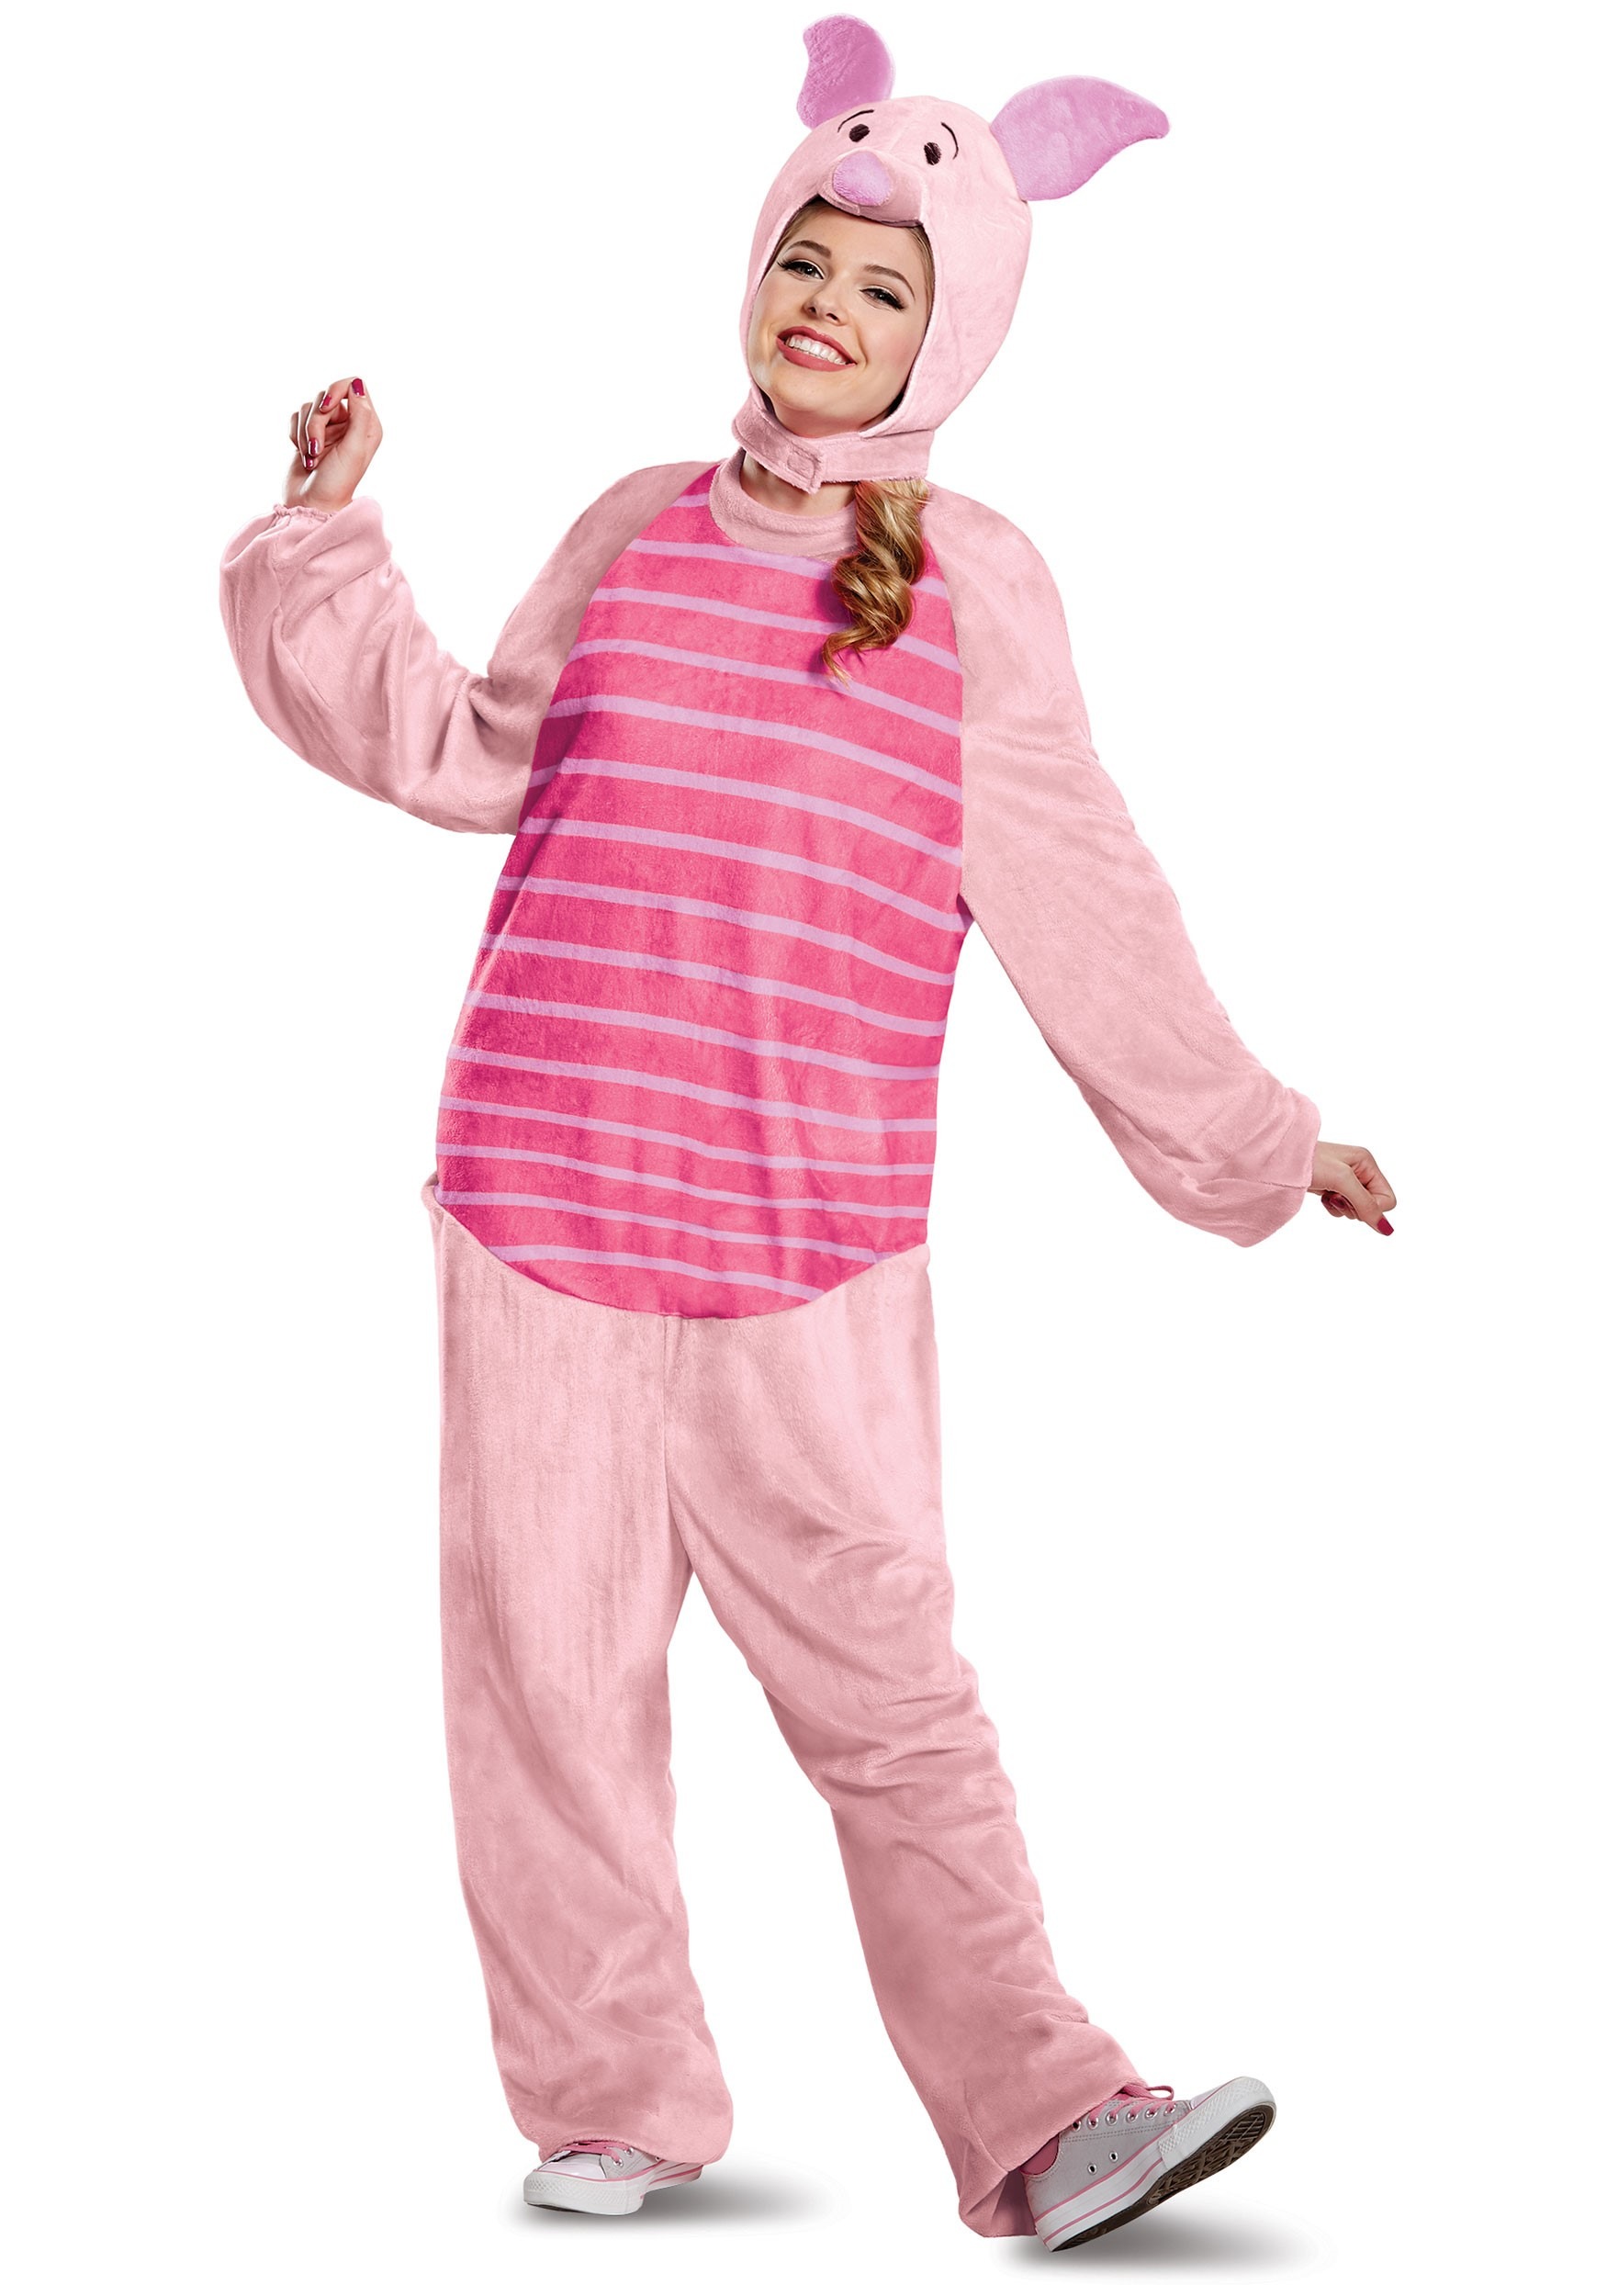 Photos - Fancy Dress Deluxe Disguise Limited Winnie the Pooh Piglet   Costume for Adu 